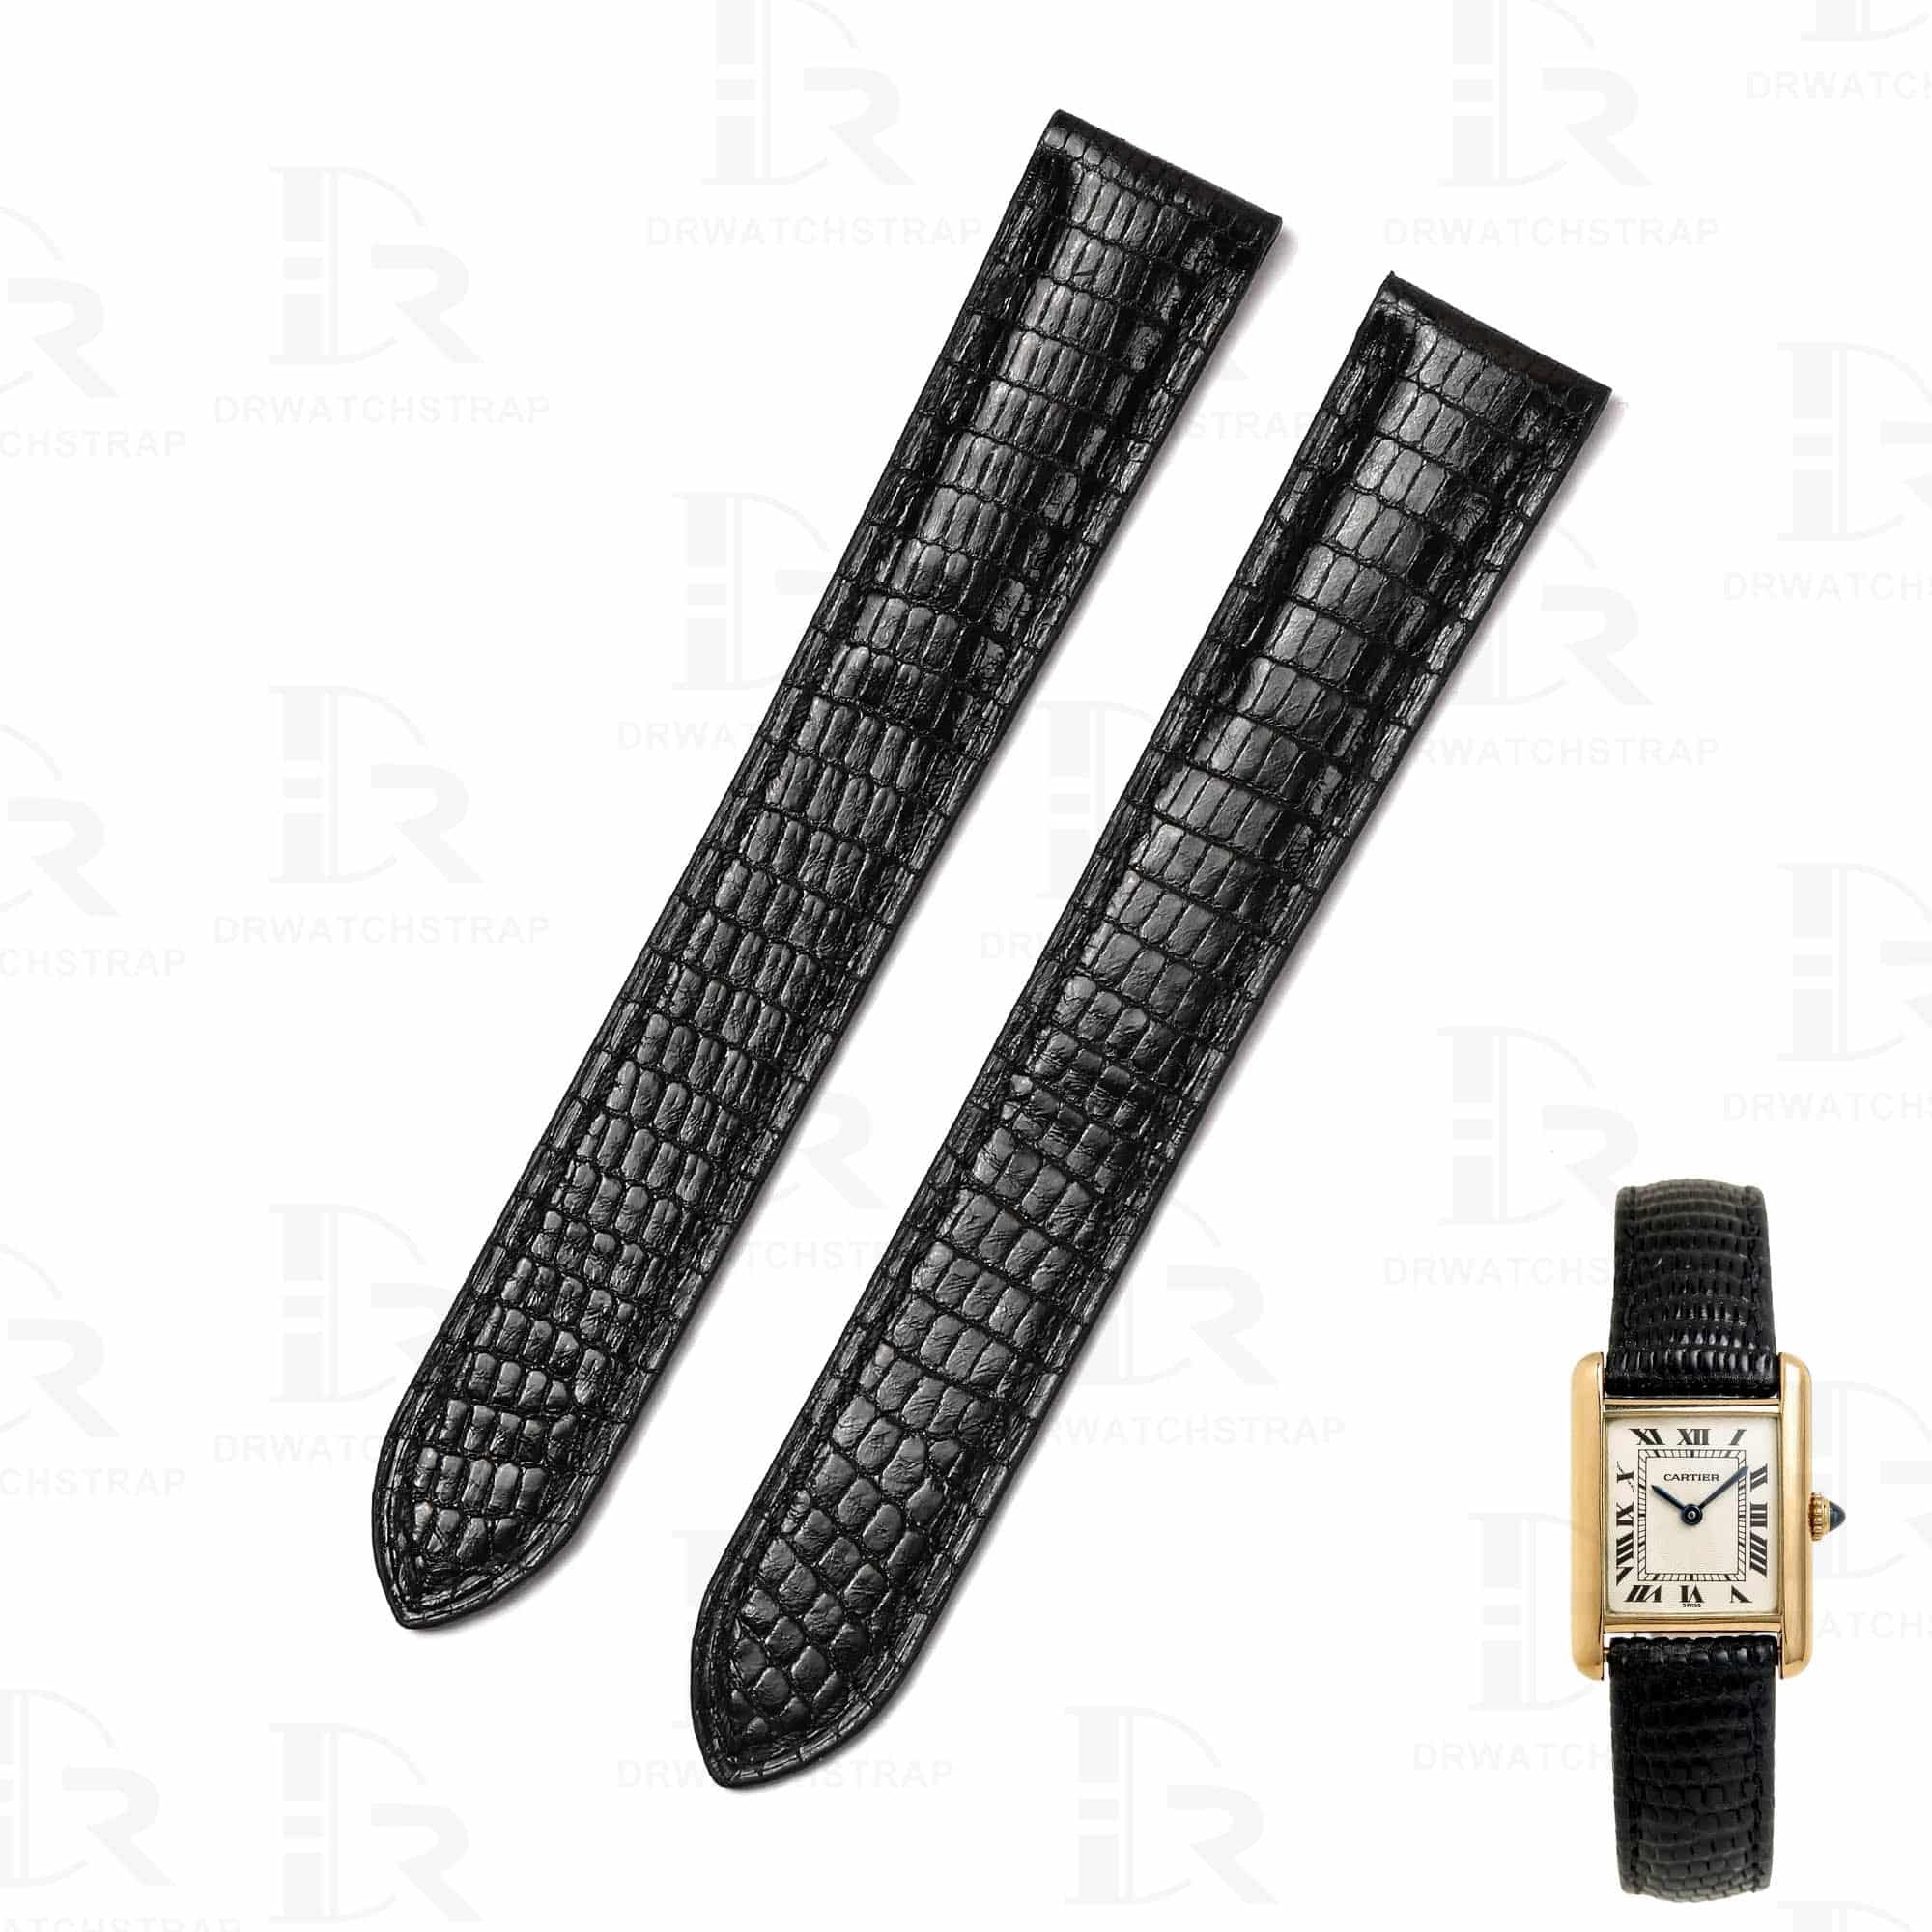 High-end quality Black lizard leather watchband for Cartier Tank